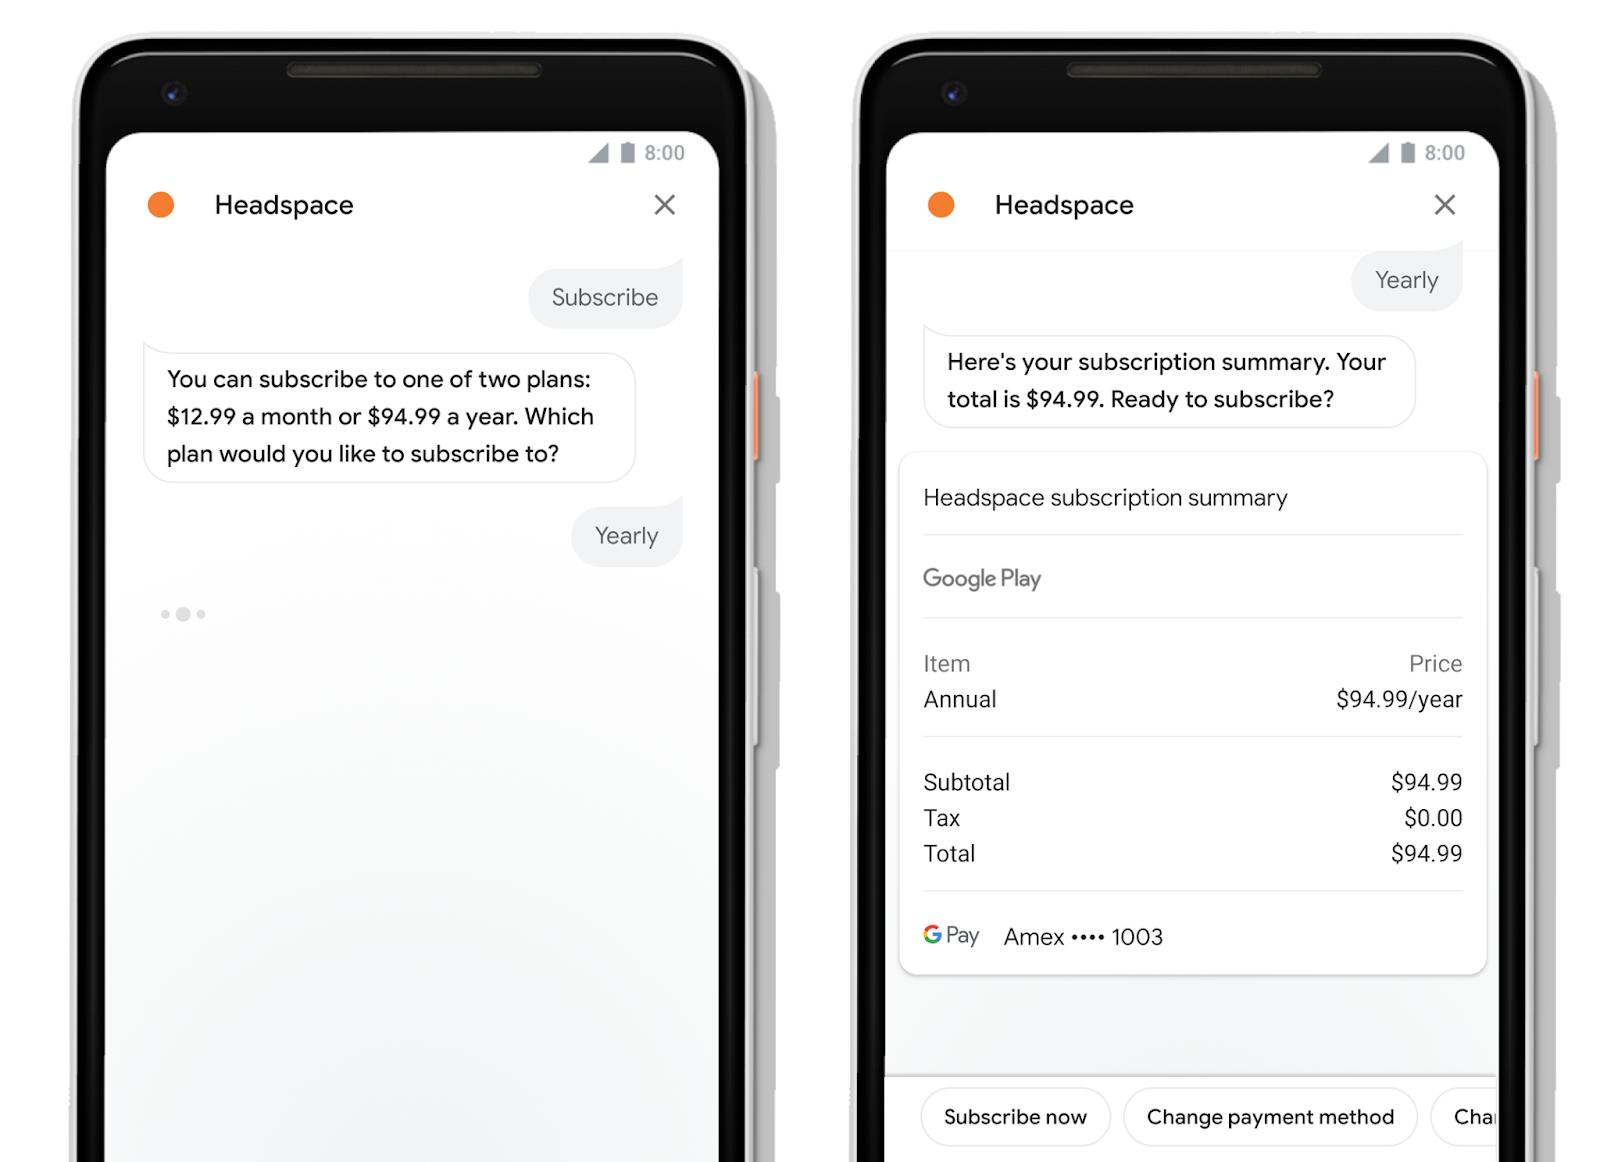 Using Google Assistant to purchase a yearly Headspace subscription - Google Assistant now lets you make in-app purchases using only your voice